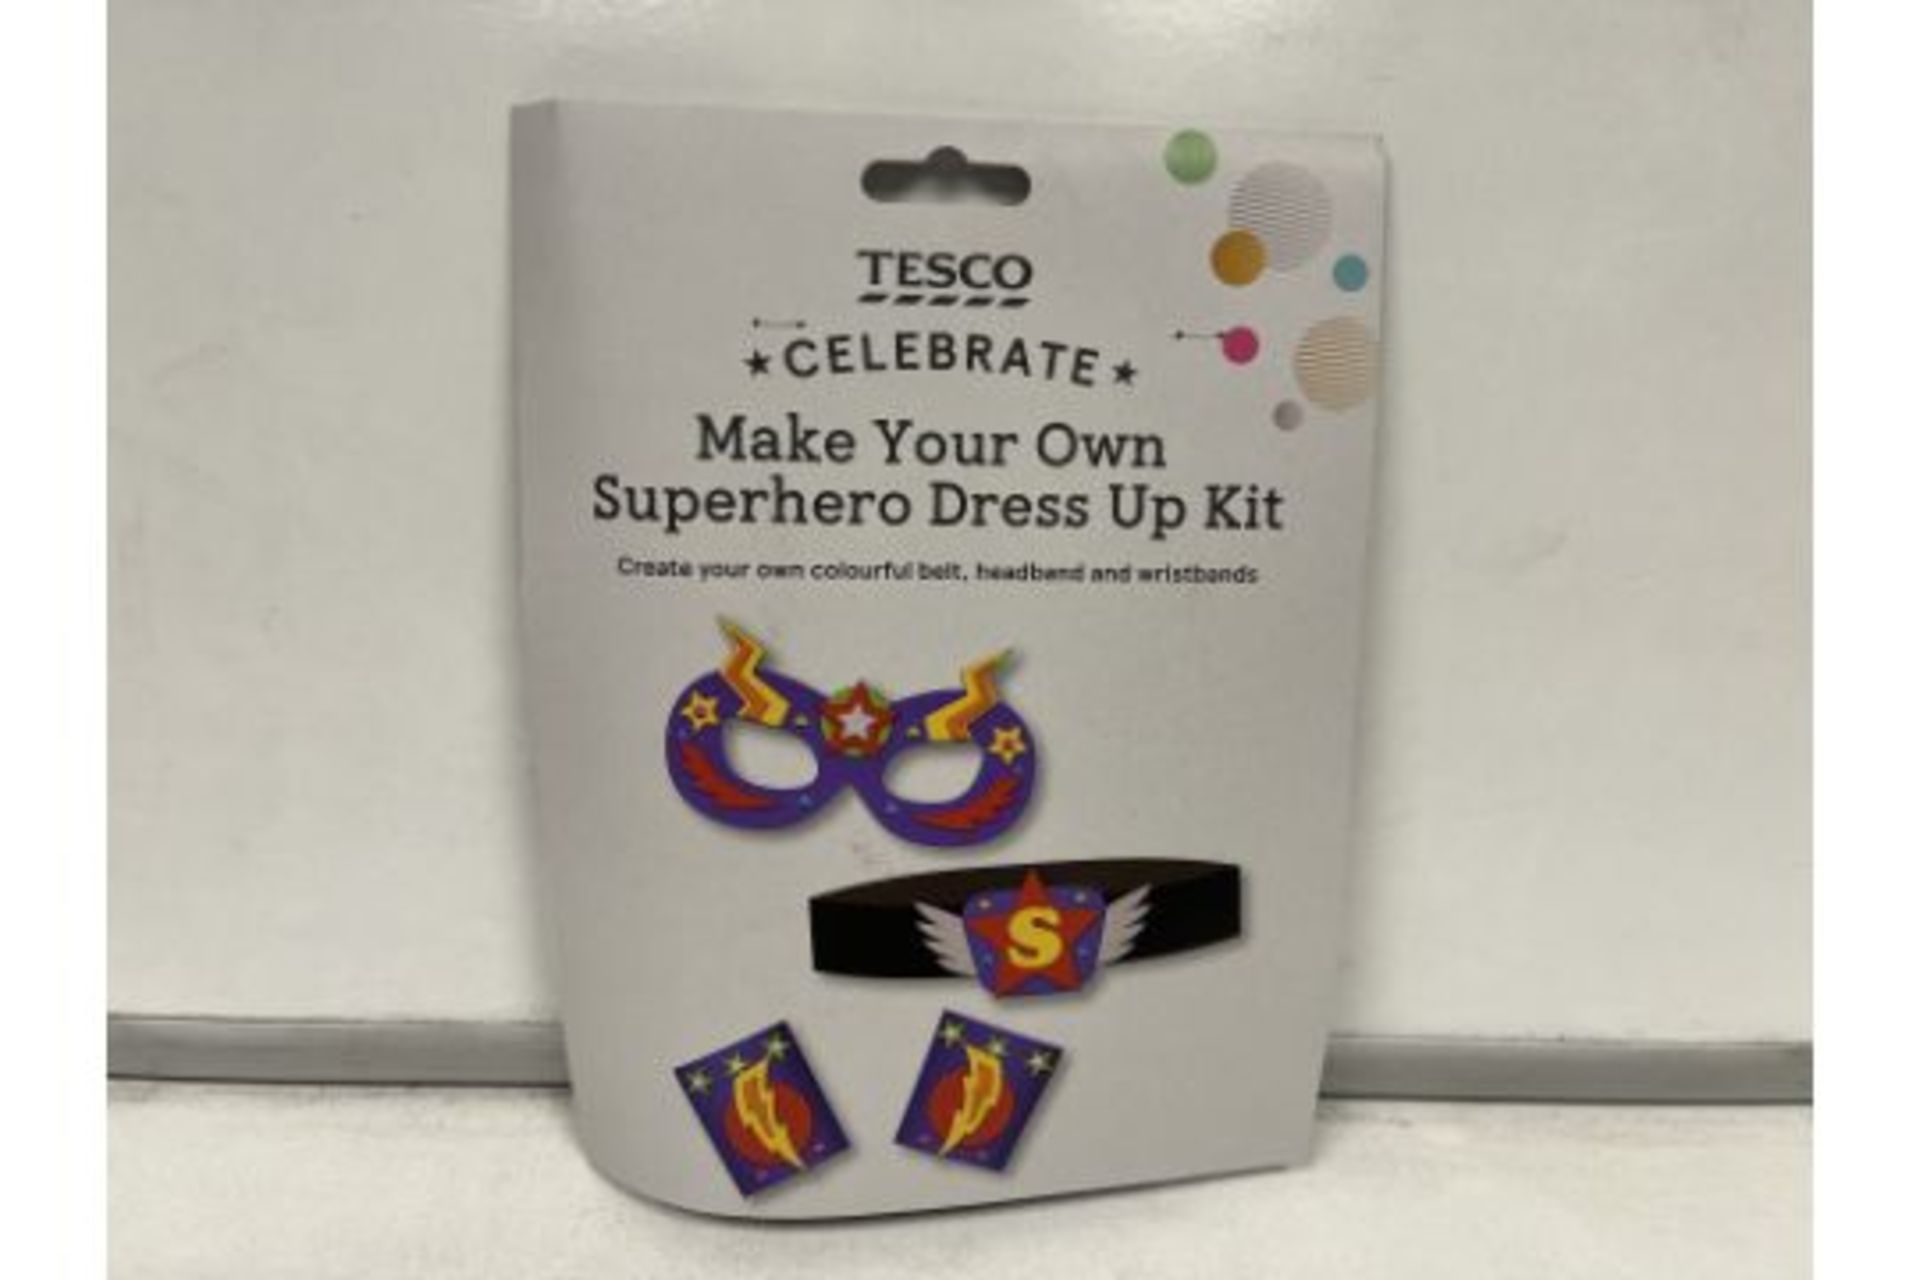 TRADE LOT 216 X NEW PACKAGED TESCO CELEBRATE MAKE YOUR OWN SUPER HERO DRESS UP KITS. INCLUDES